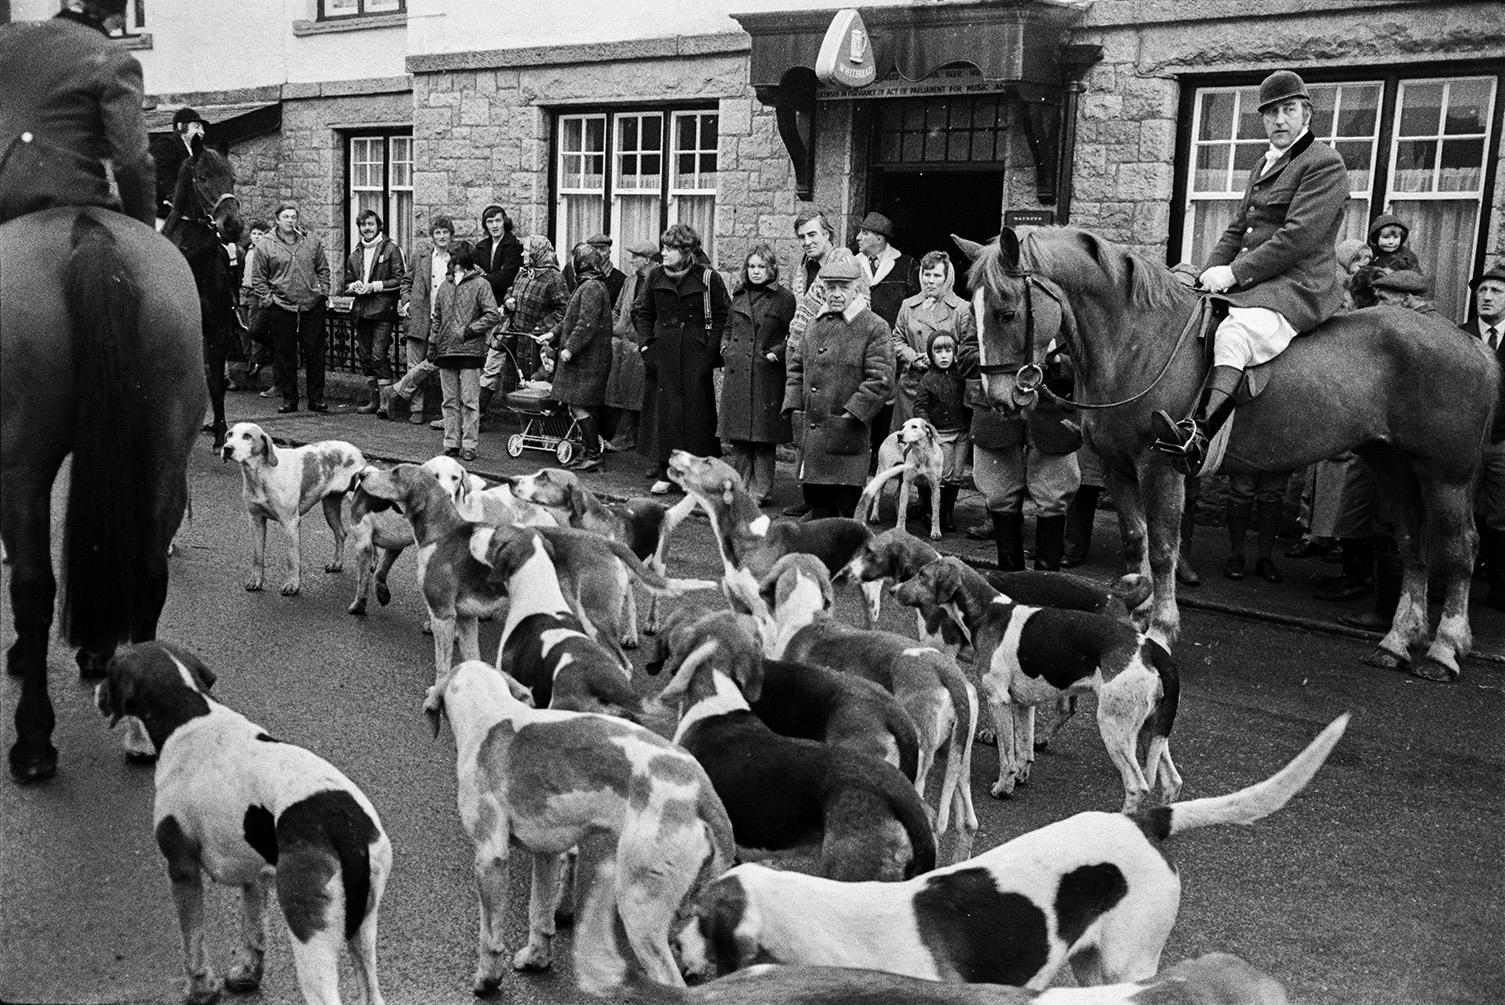 Spectators watching a Torrington Farmers Hunt meet outside a pub in Winkleigh. Mounted huntsmen and hounds are visible.